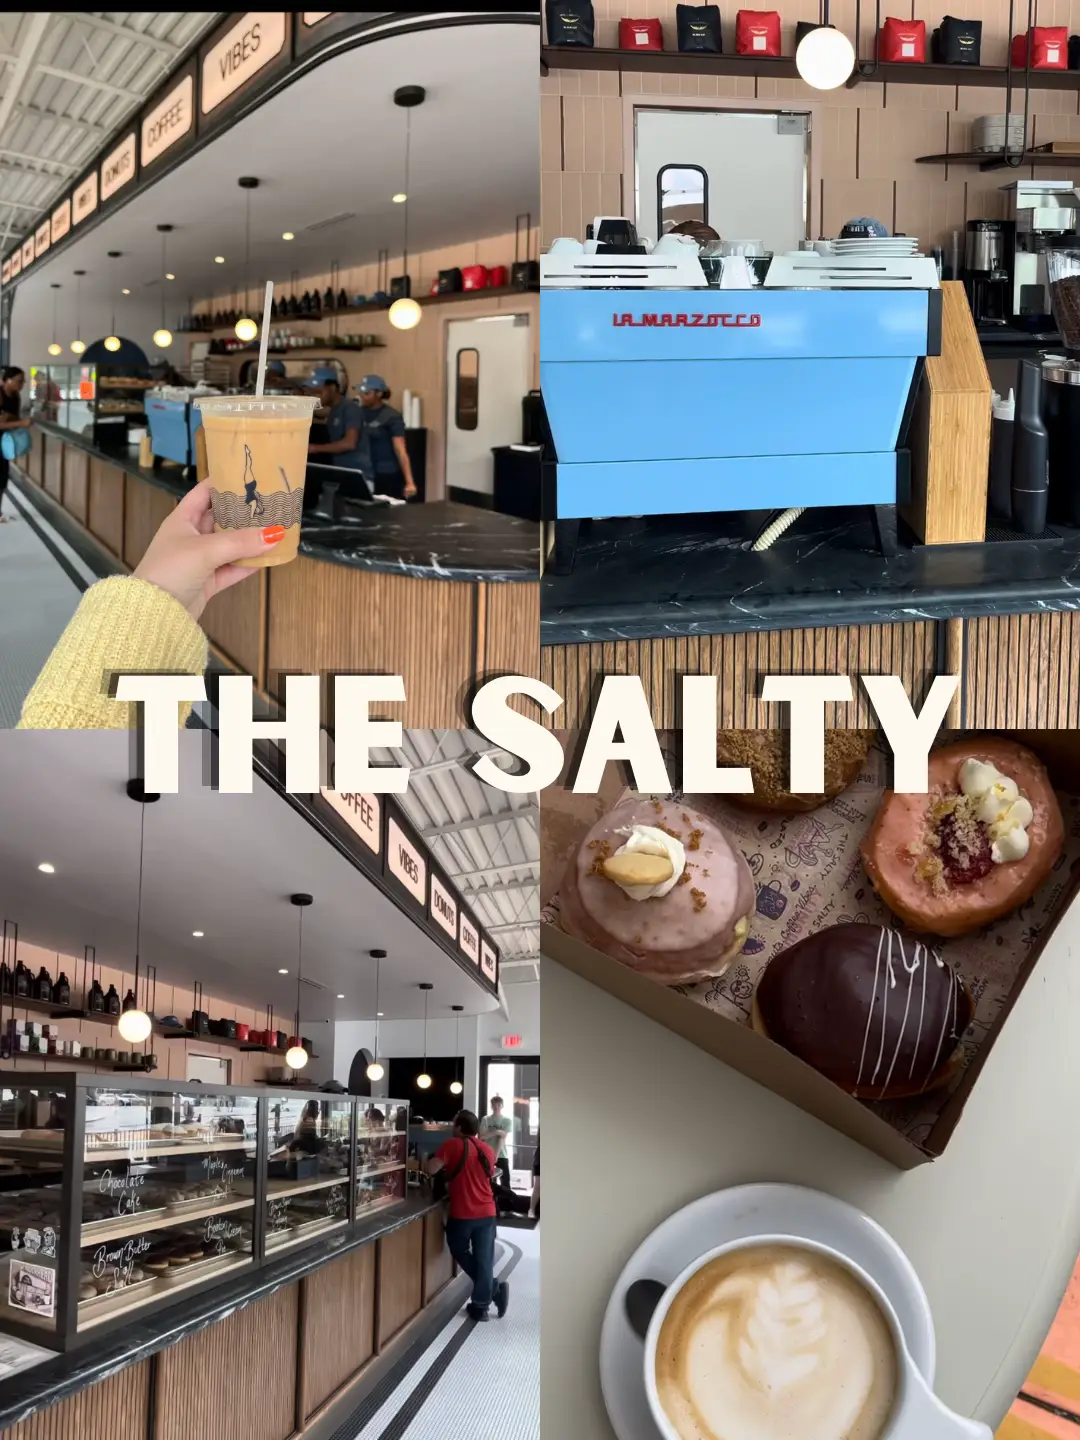  A collage of images of food with the words "The Salty" at the top.